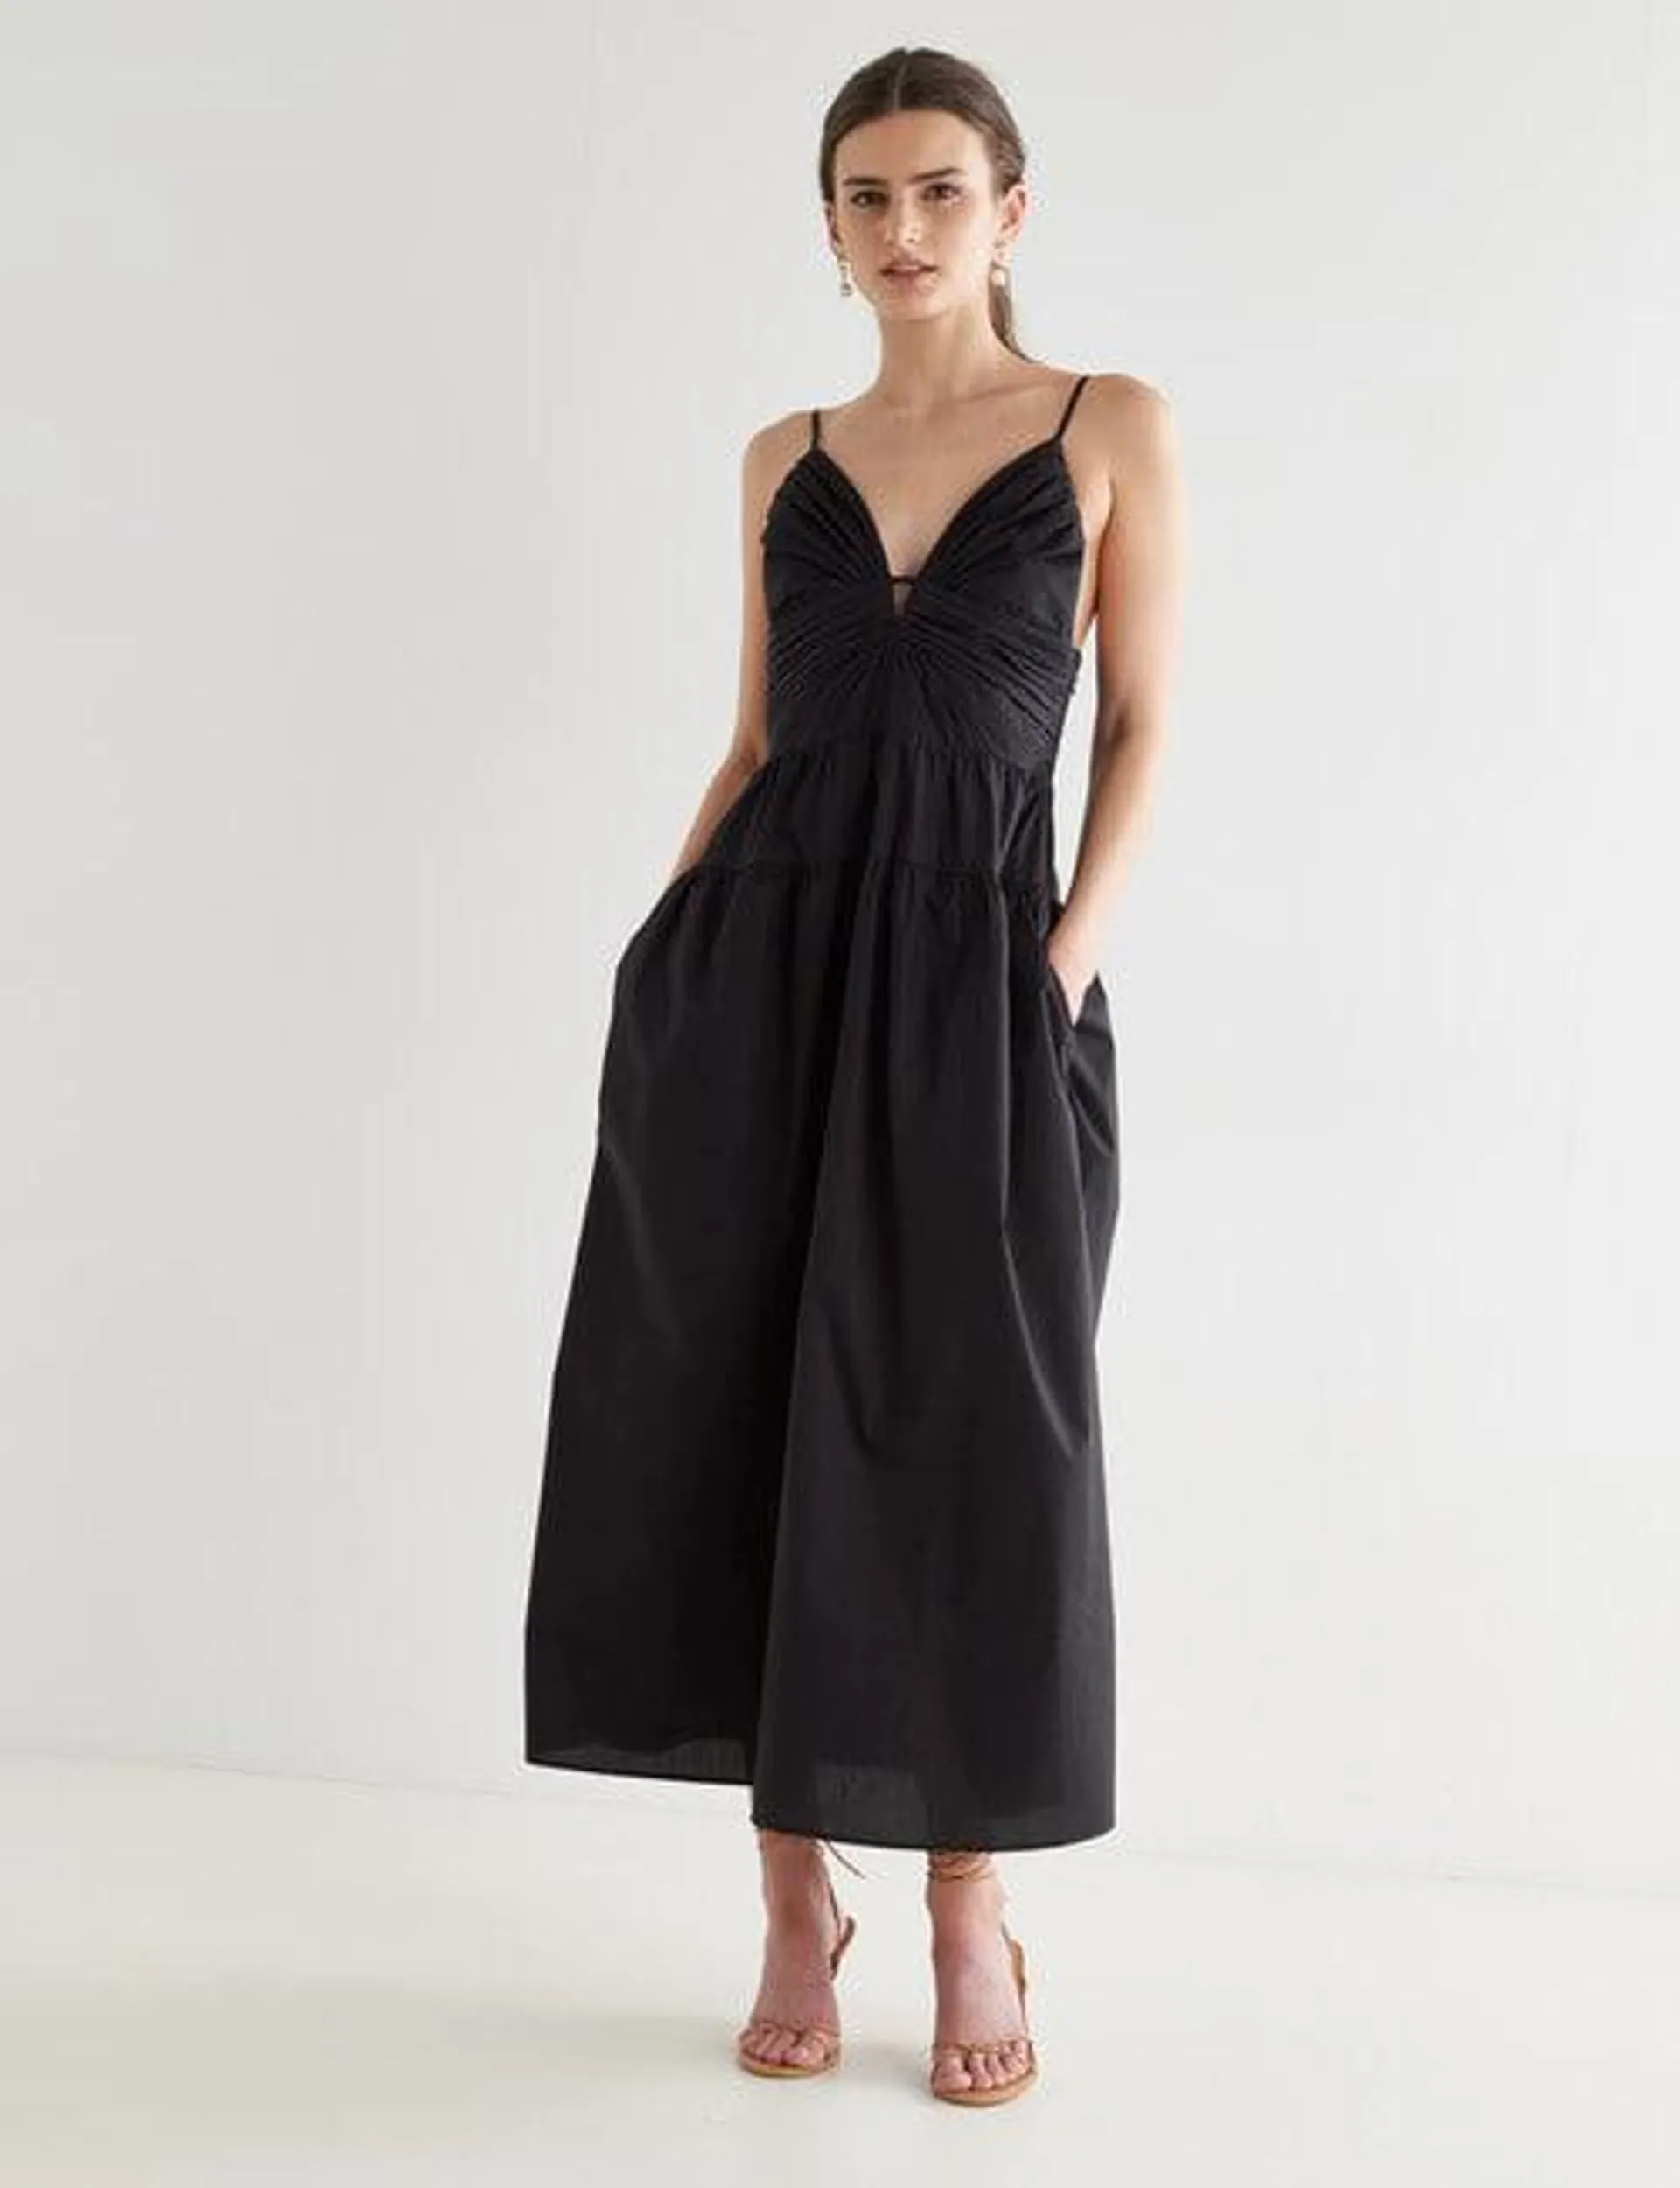 State of play Mazzy Dress, Black